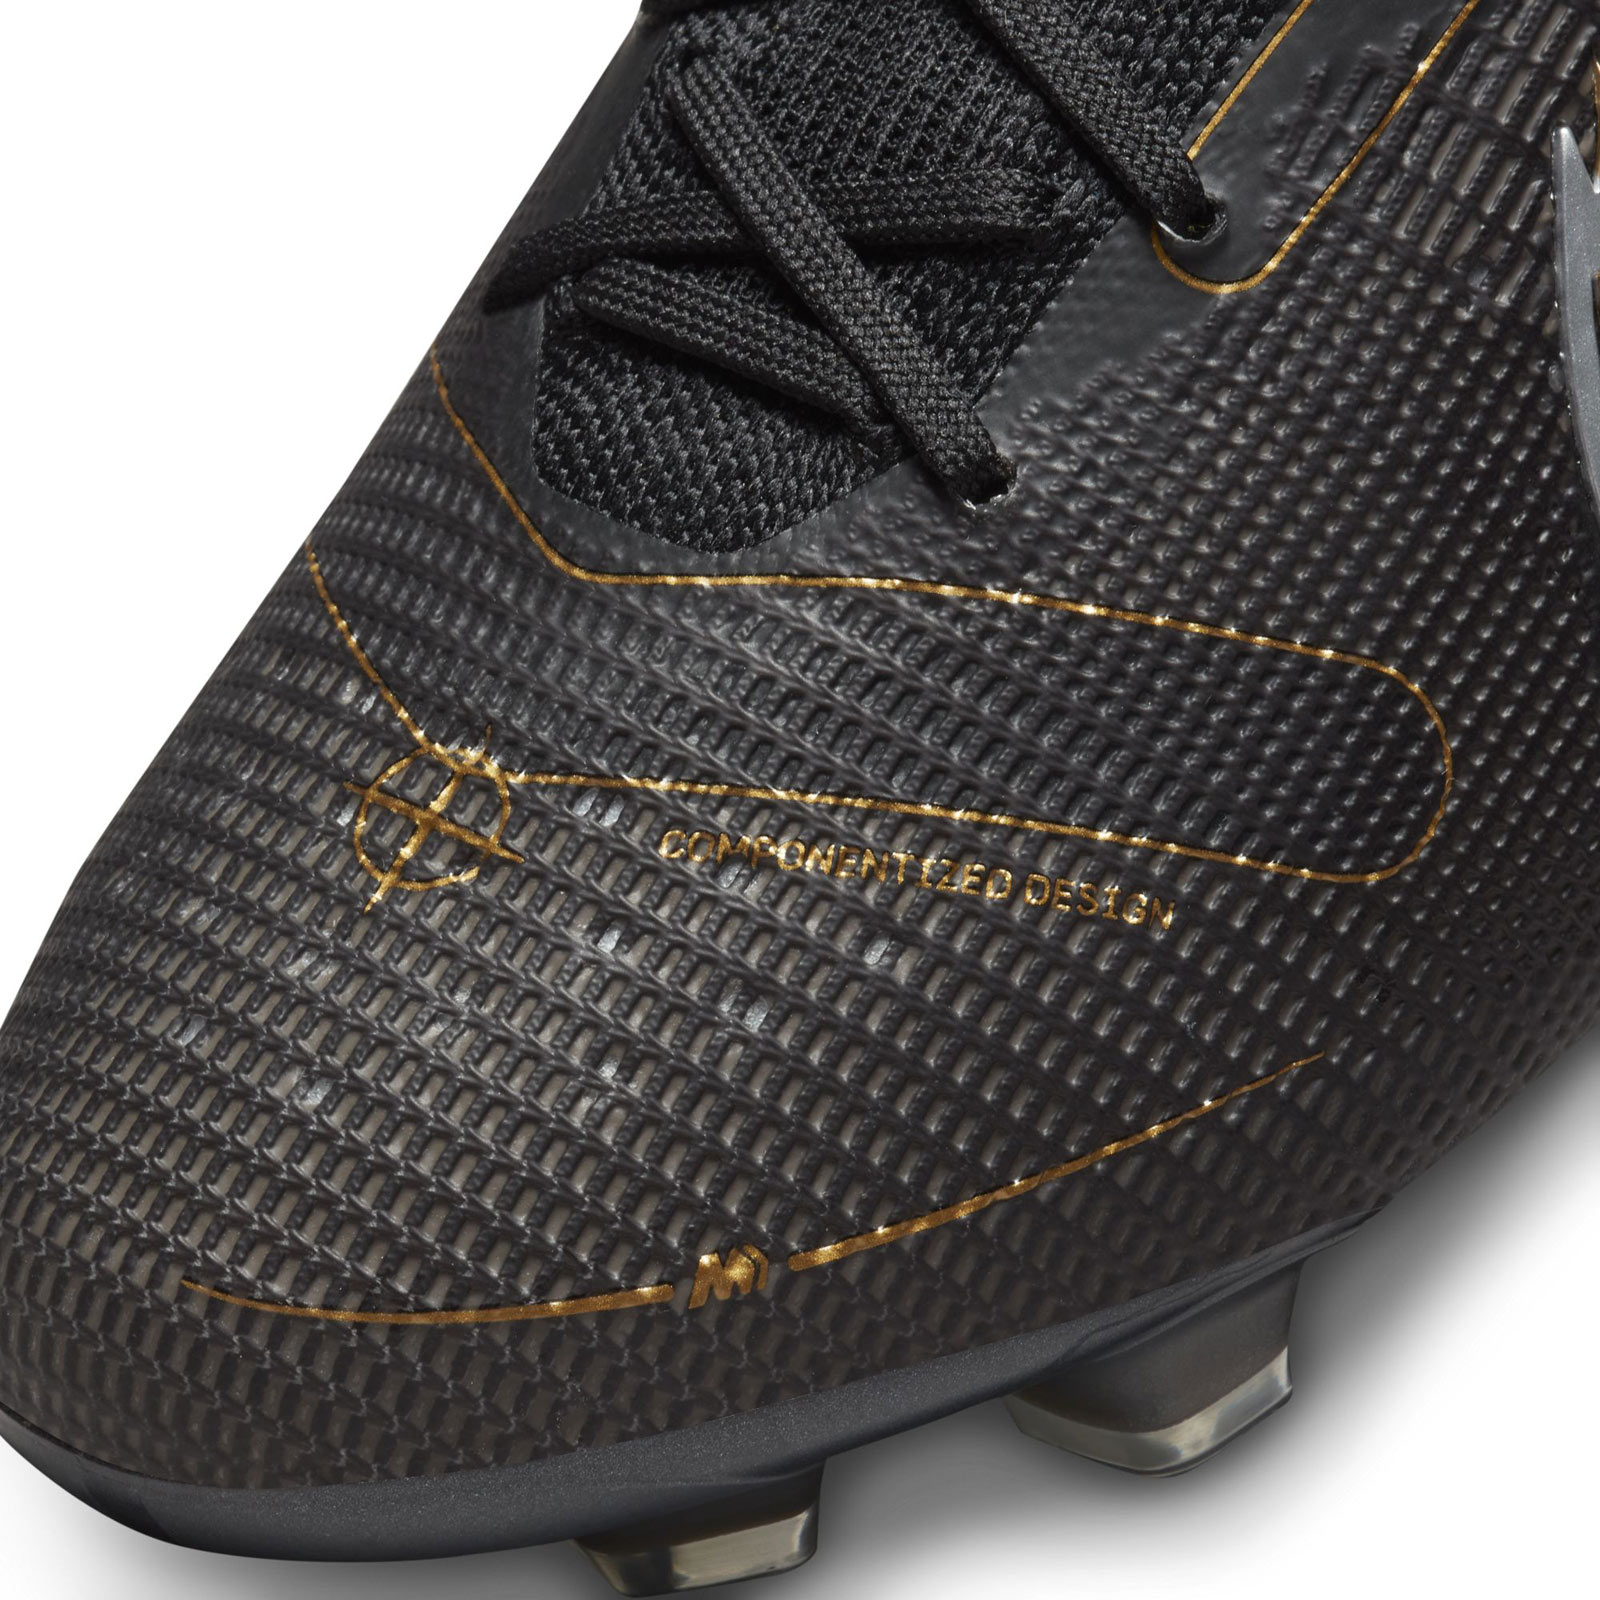 NIKE MERCURIAL SUPERFLY 8 ELITE FIRM-GROUND FOOTBALL BOOTS